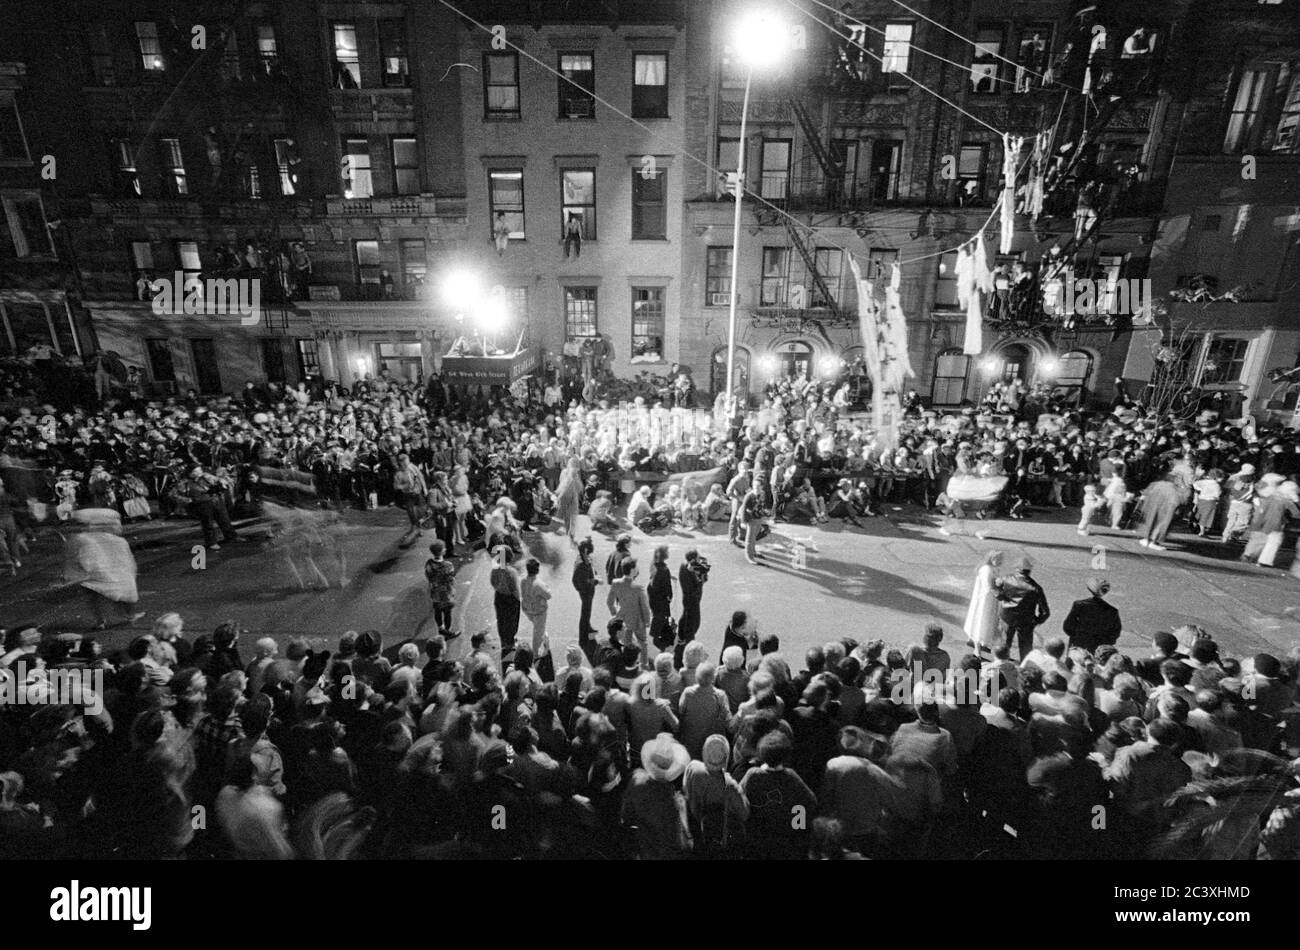 2nd story view, W. 10th at the Greenwich Village Halloween Parade, New York City, USA in the 1980's  Photographed with Black & White film at night. Stock Photo